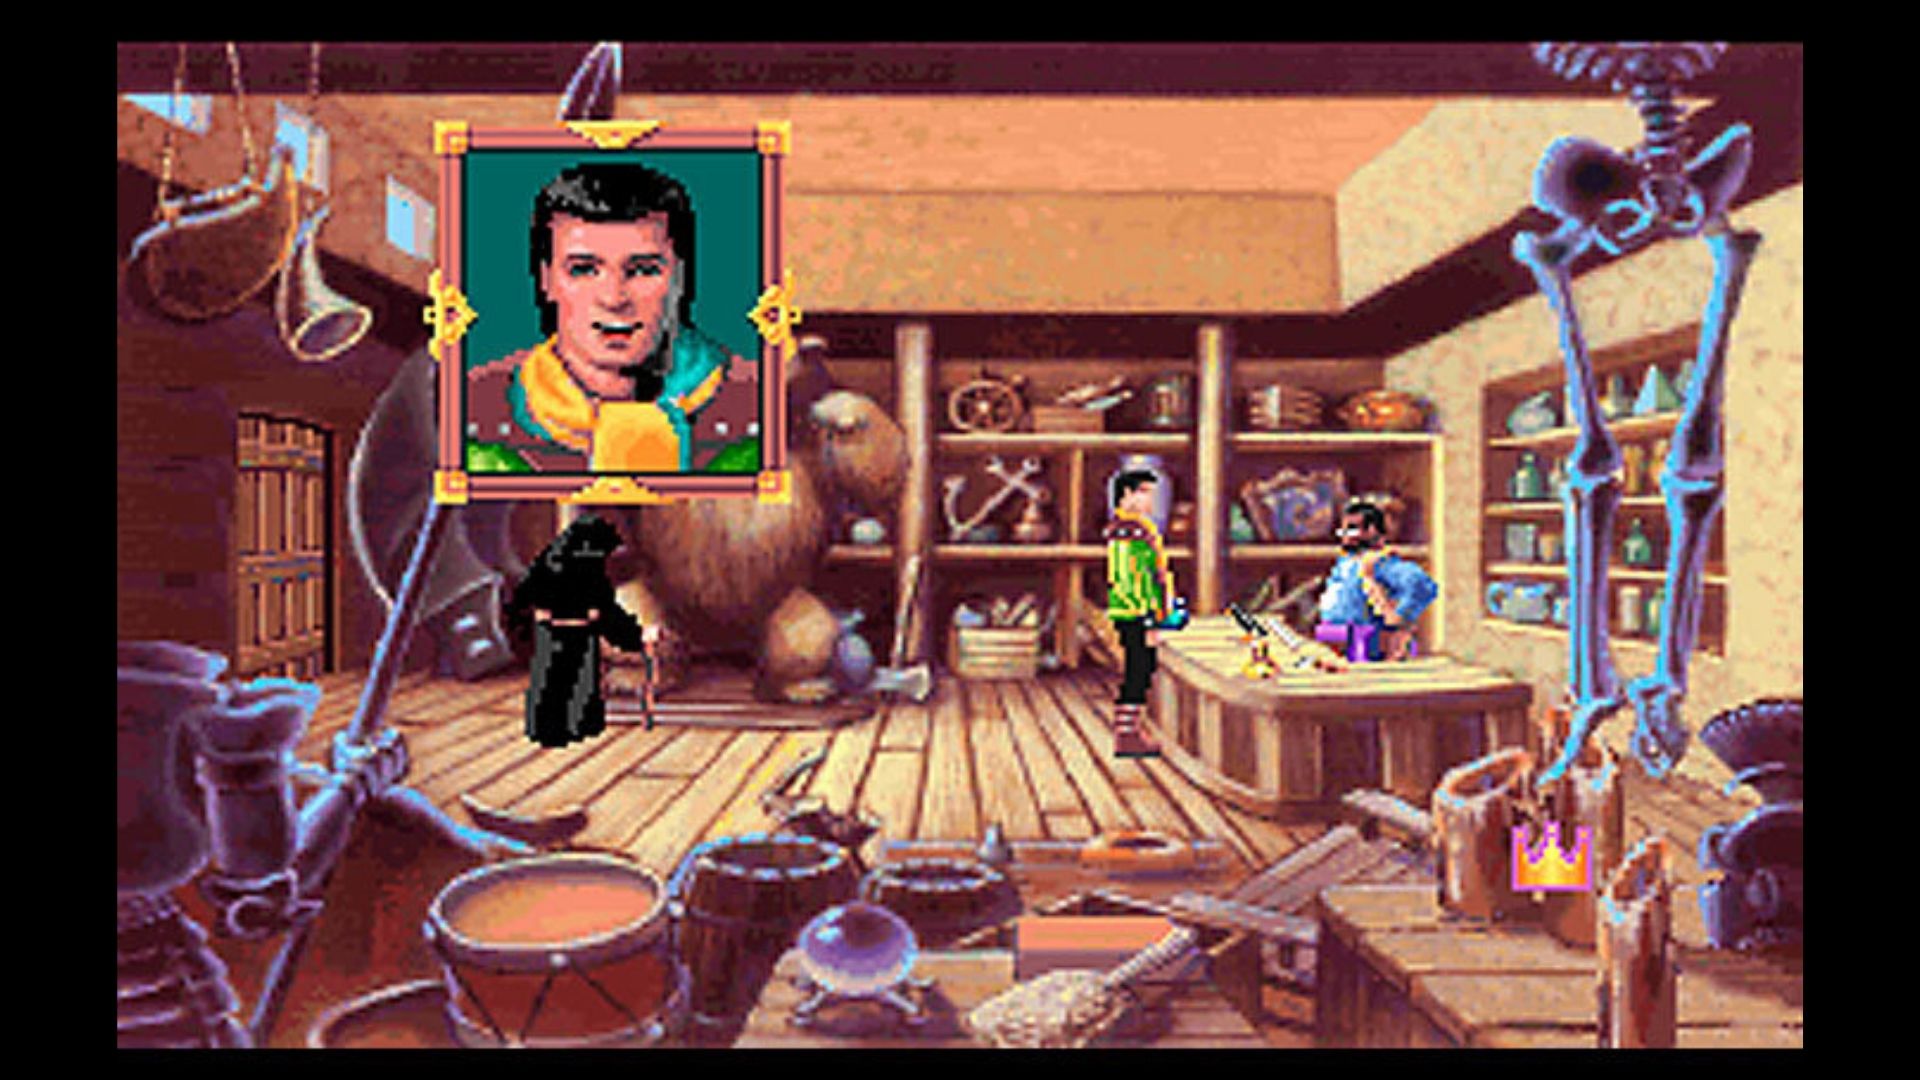 Every Sierra graphical adventure game, ranked